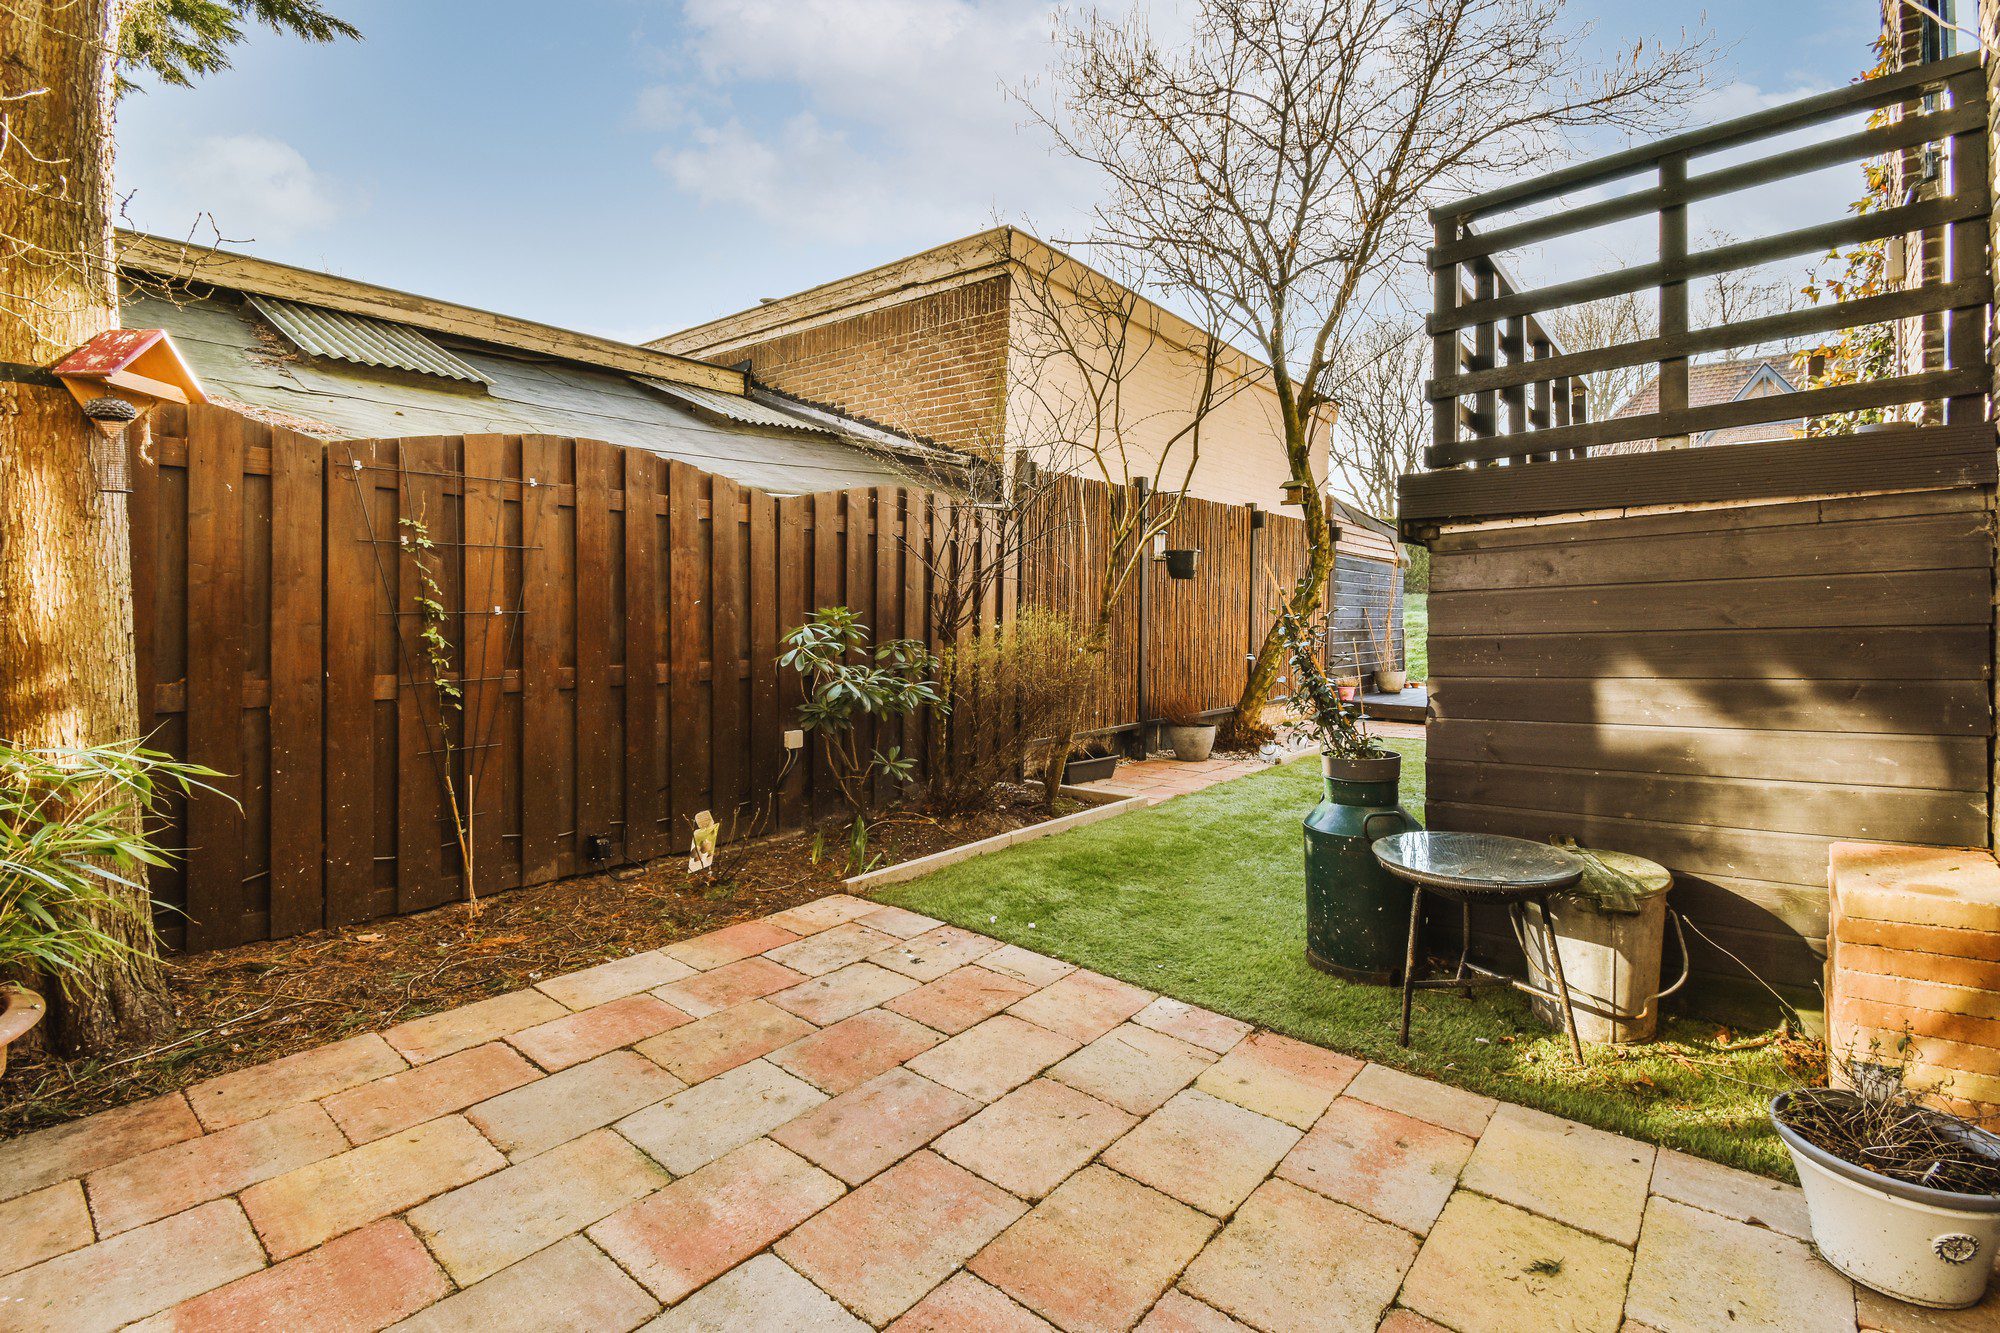 This image features a quaint backyard garden setting. Here's what can be seen:1. Paving Stone Patio: There's a square patterned paving stone patio in the foreground, featuring various shades of red and beige.2. Wooden Fence: Surrounding the area is a vertical wooden fence that has been stained or painted brown, providing privacy.3. Greenery: To the right and along the fence, there are potted plants plus a patch of green artificial grass. On the left, there appears to be a small garden bed with mulch and young plants or trees, suggesting an interest in gardening.4. Garden Structures: There is a wooden structure at the far right, which could be part of a deck or a raised area, with lattice work likely intended for climbing plants.5. Accessories: You can notice garden accessories such as pots, a green watering can, a black round table, metal chairs, and a classic silver watering can. These elements add to the functional and lived-in charm of the space.6. Tree: There's a deciduous tree without leaves, which suggests the photo may have been taken during a cooler season.7. Buildings: In the background, the backs of other homes or buildings are visible over the fence, indicating this garden is part of a residential area.Overall, it's a serene and well-maintained private outdoor space designed for relaxation and possibly small gatherings.